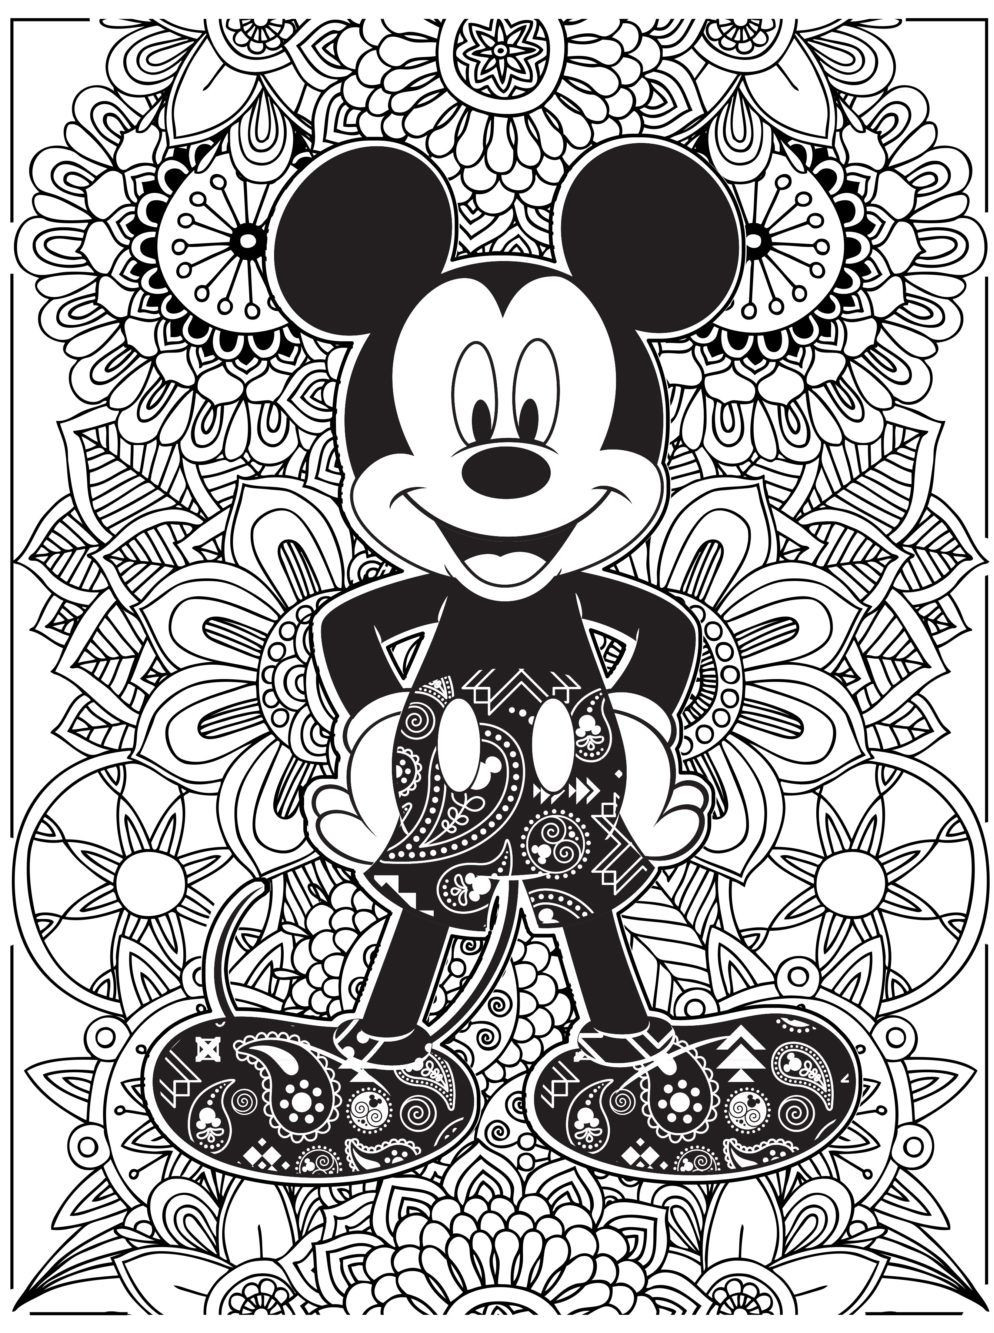 Kids-n-fun.com | Coloring page Disney difficult Mickey Mouse